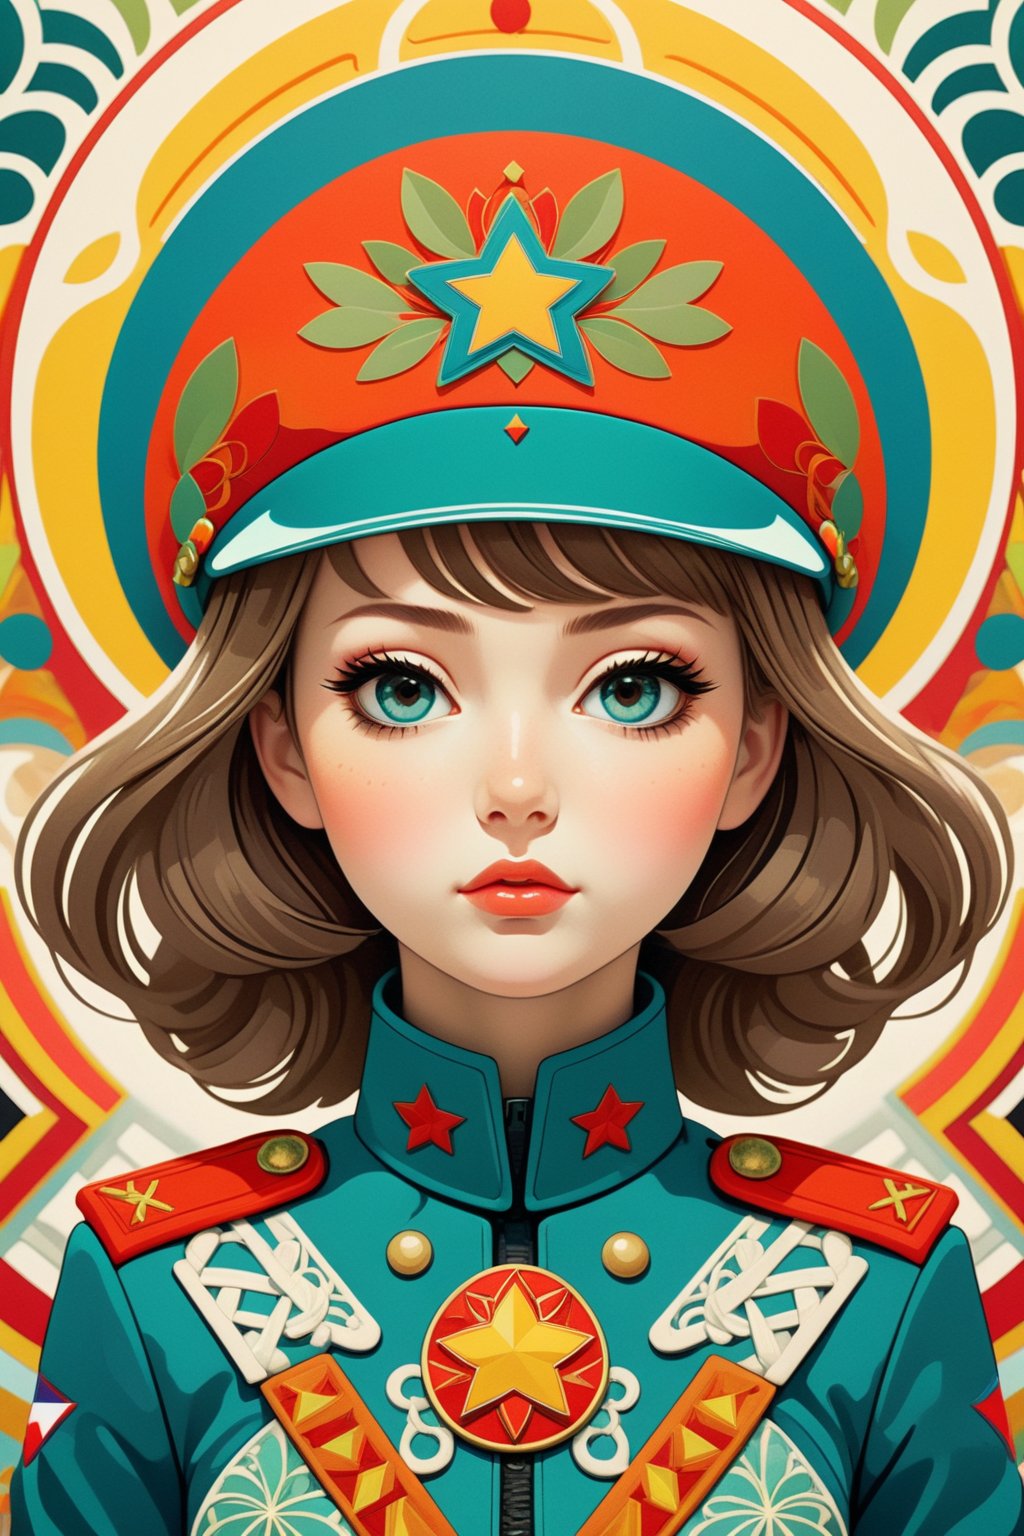 masterpiece, long shot fusion realism, abstract style and psychodelic. Mate colorful palette, wallpaper, Intricate geometry ornament in zentangle style. cute Stunning russian girl, soviet military uniform, beautiful facial features, augmentation focus, high aesthetic, truly artwork, detailed abstract background, art nouveau,more detail XL